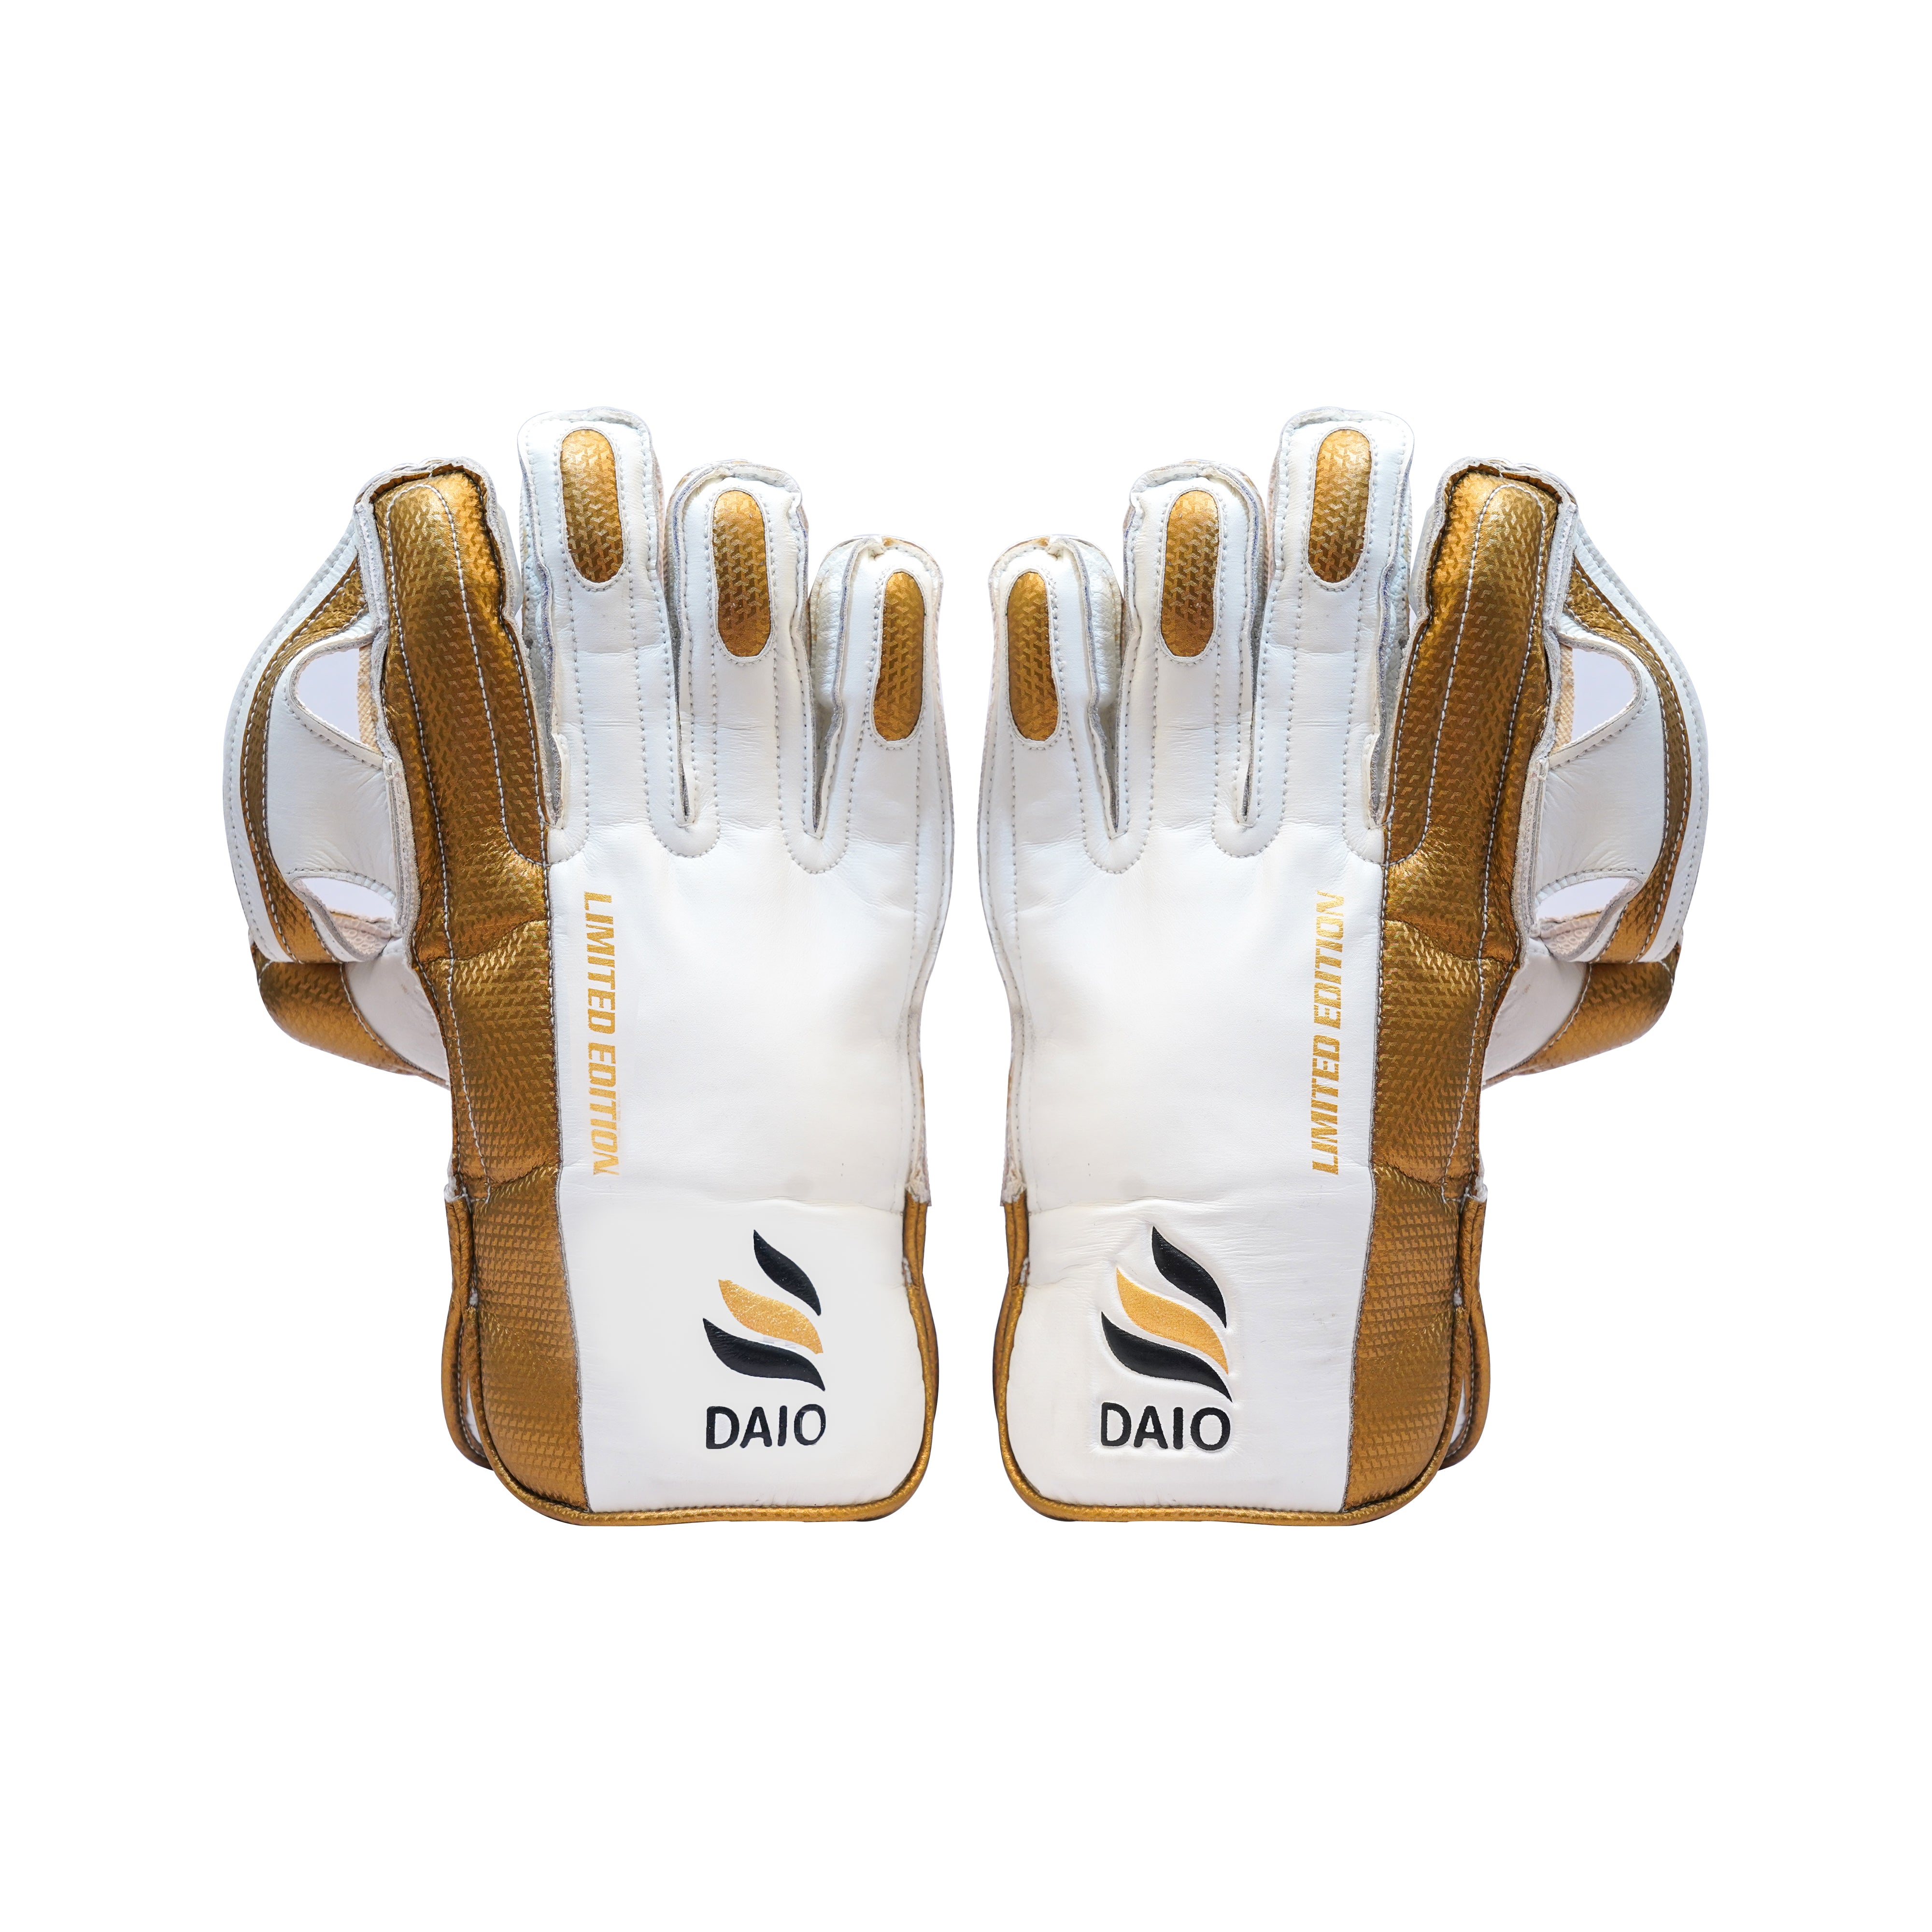 Daio limited edition wicket keeping gloves